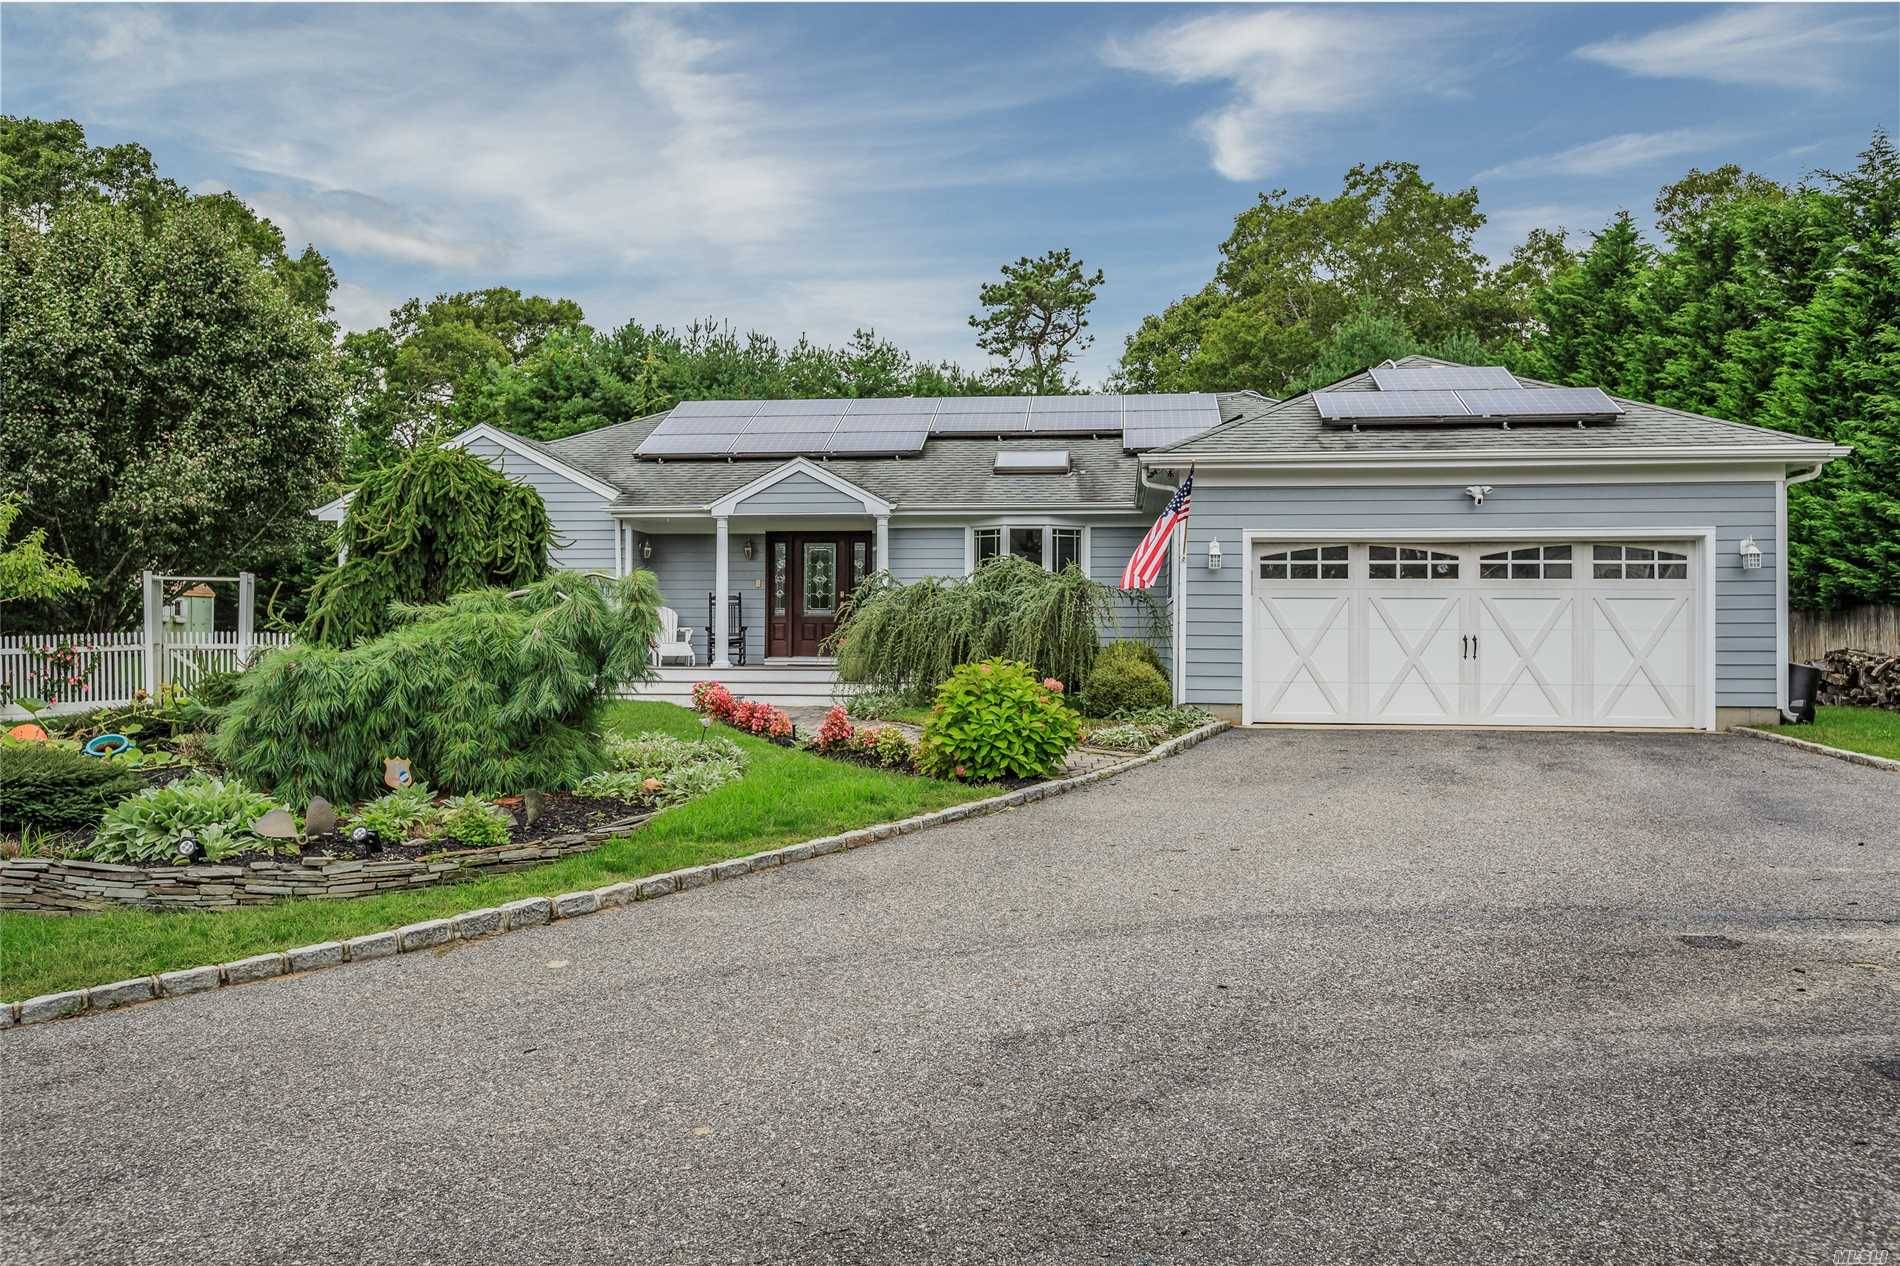 Meticulously Maintained Home In The Village Of Westhampton Beach.